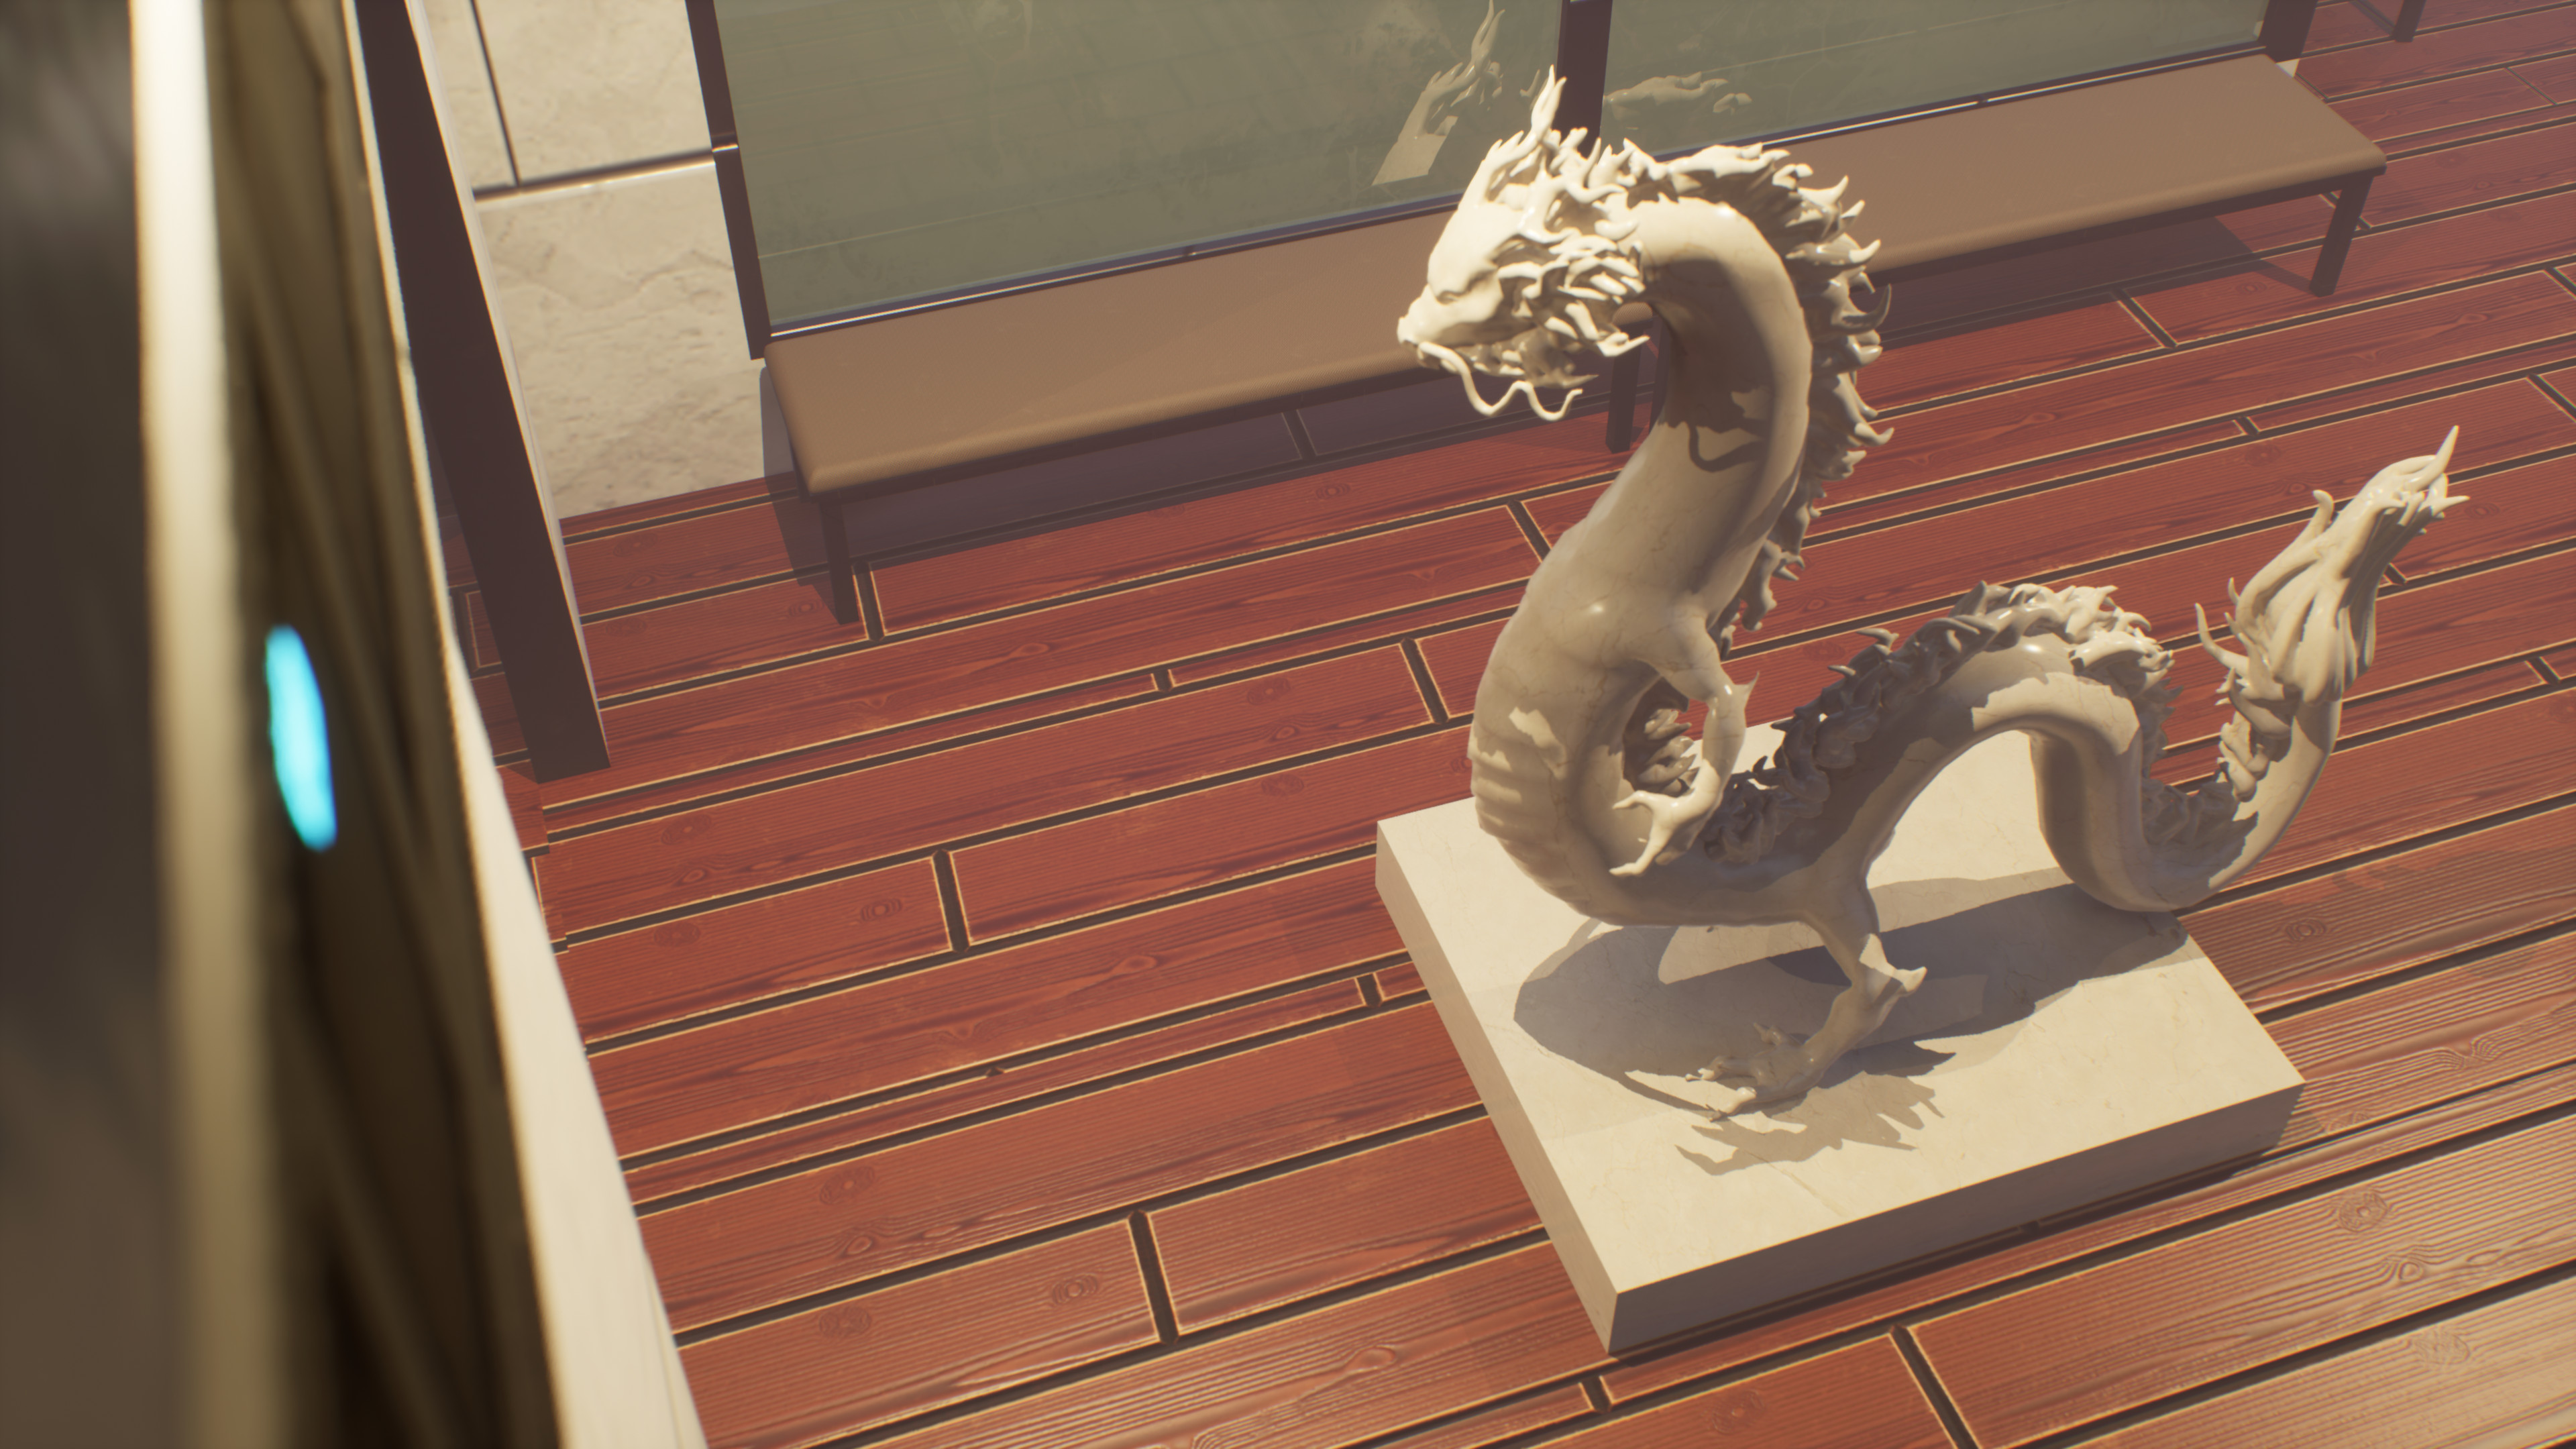 This dragon statue is my Water Dragon I had developed previously. Check it out under "Game PL"! 